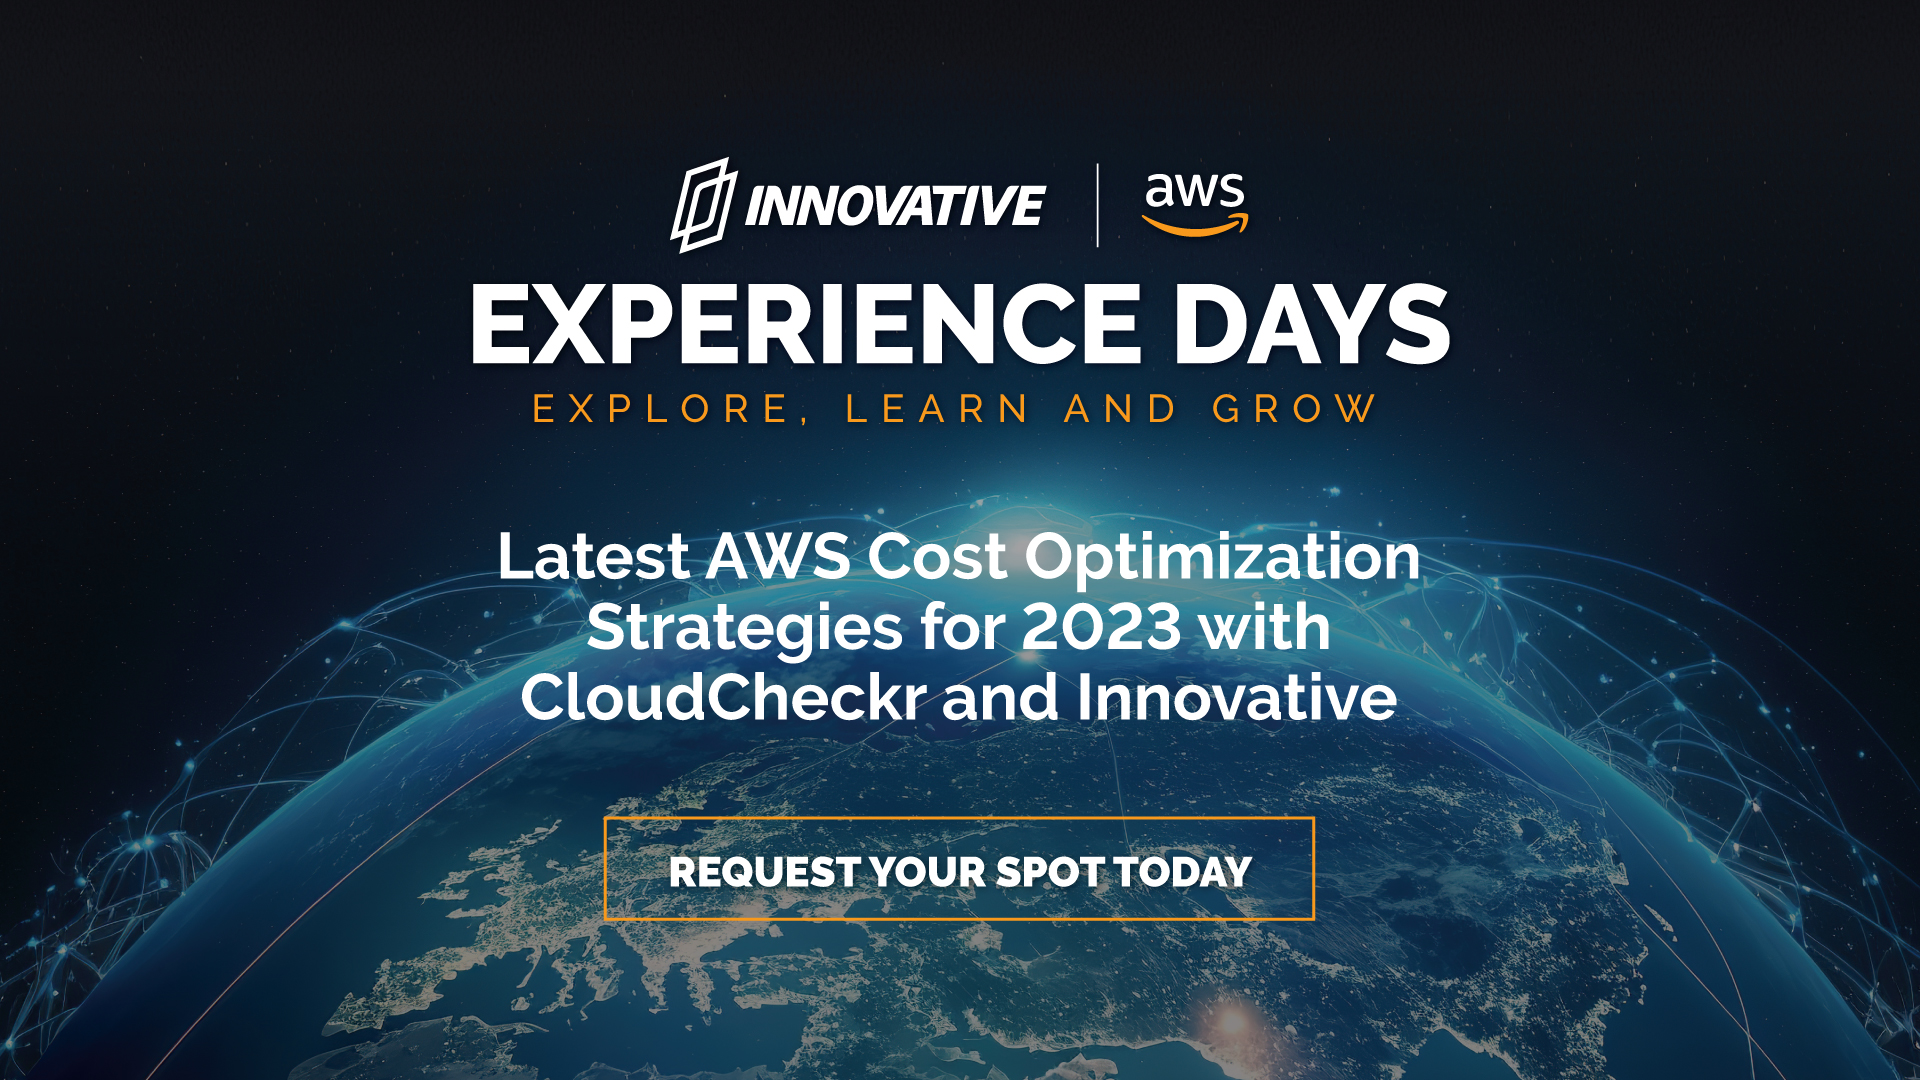 Latest AWS Cost Optimization Strategies for 2023 with CloudCheckr and Innovative